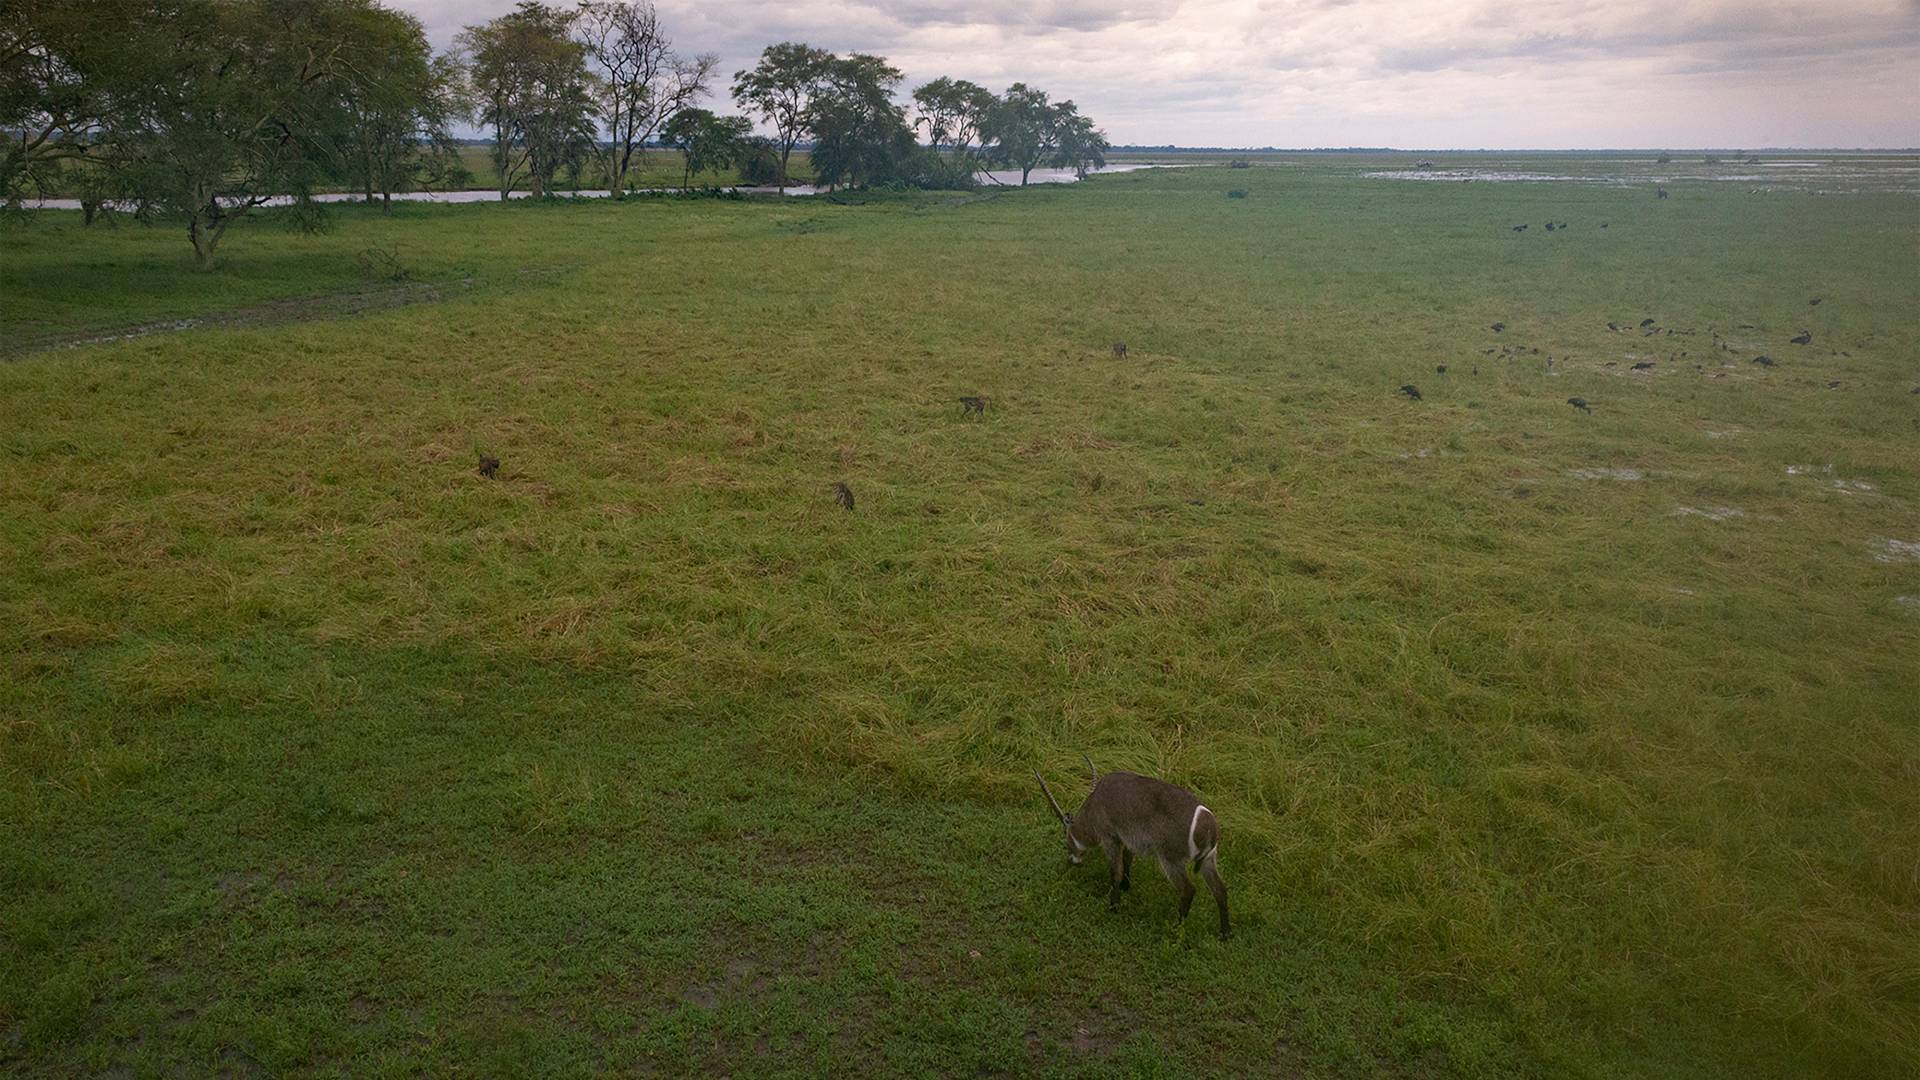 photo 1/3 a grassy plain with a deer grazing.